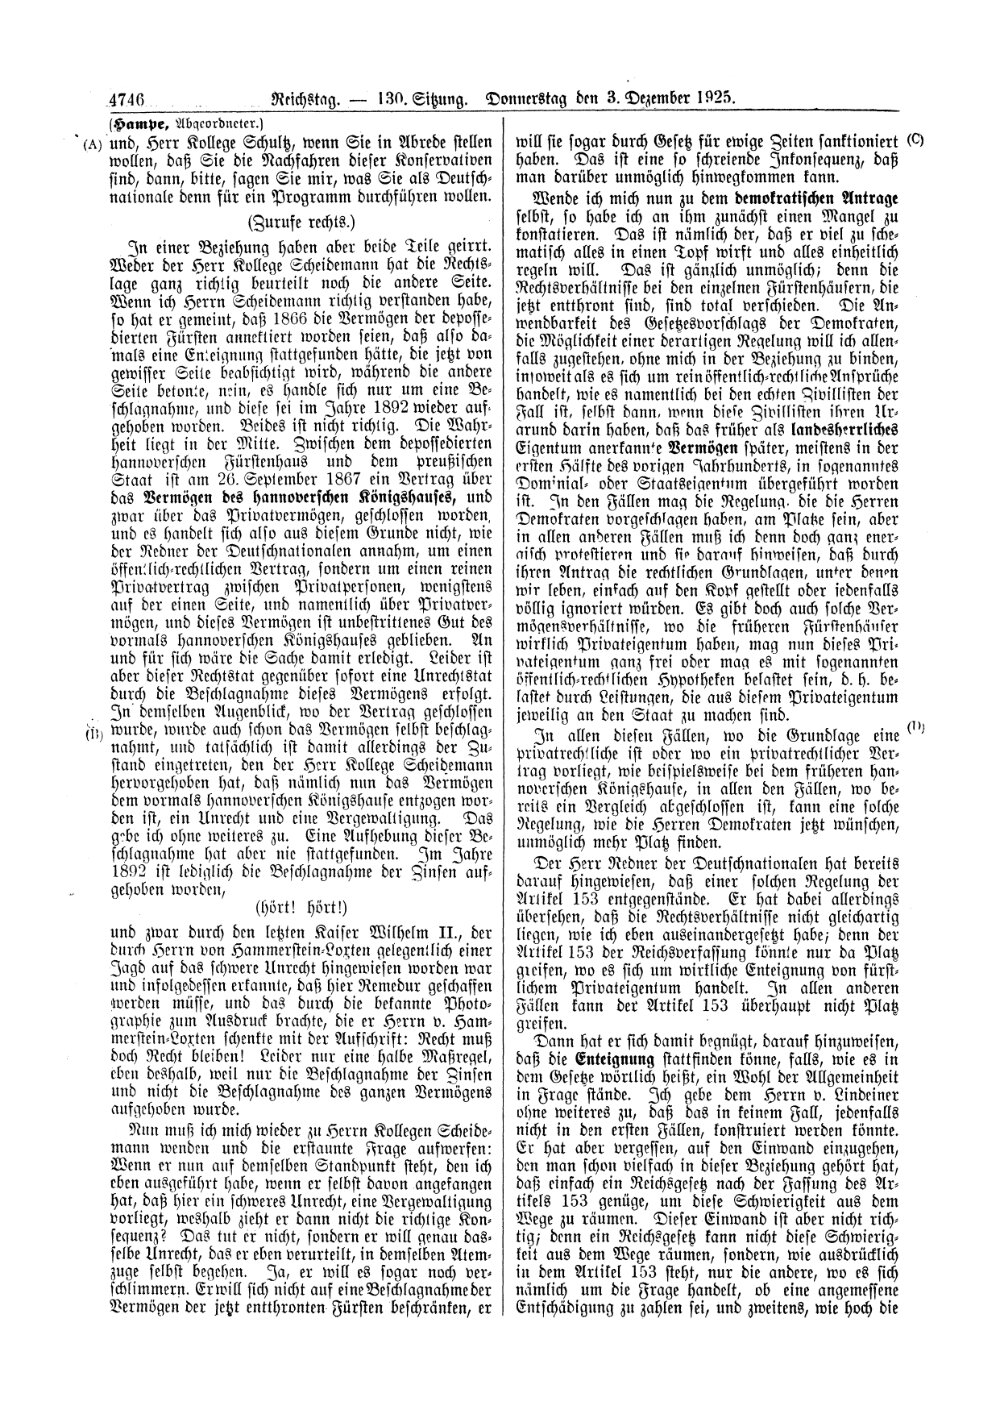 Scan of page 4746